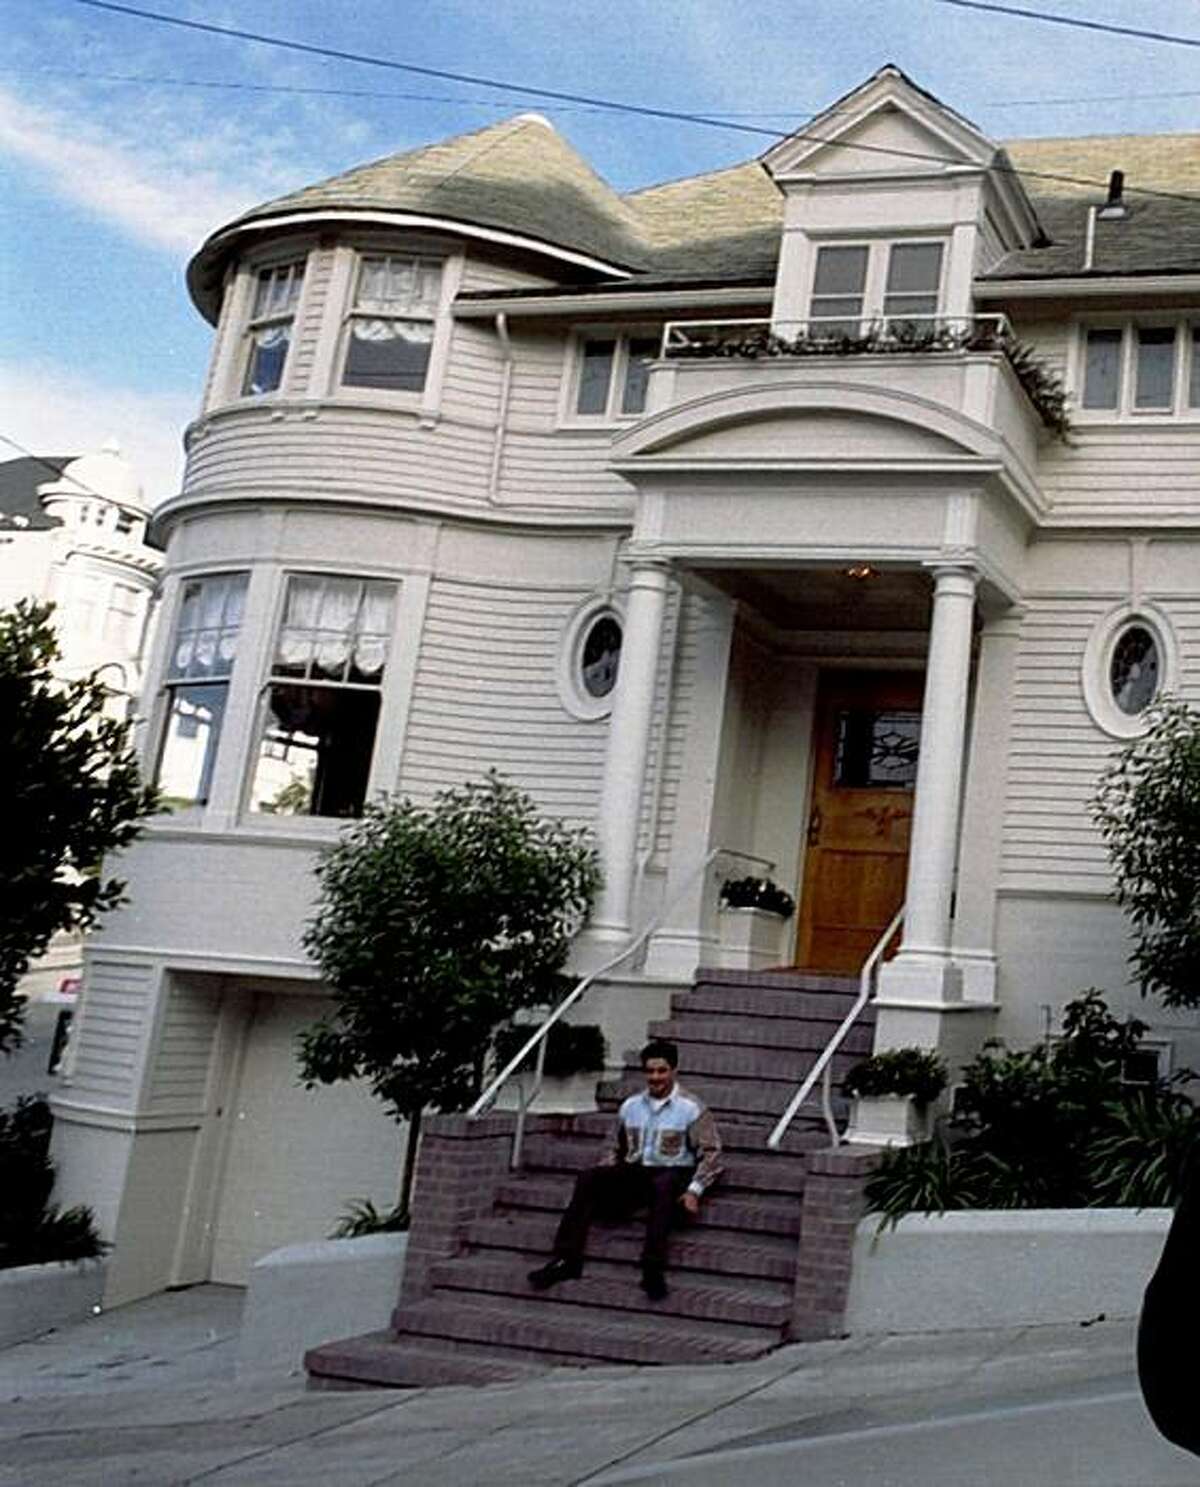 The house that was used in the movie "Mrs. Doubtfire."